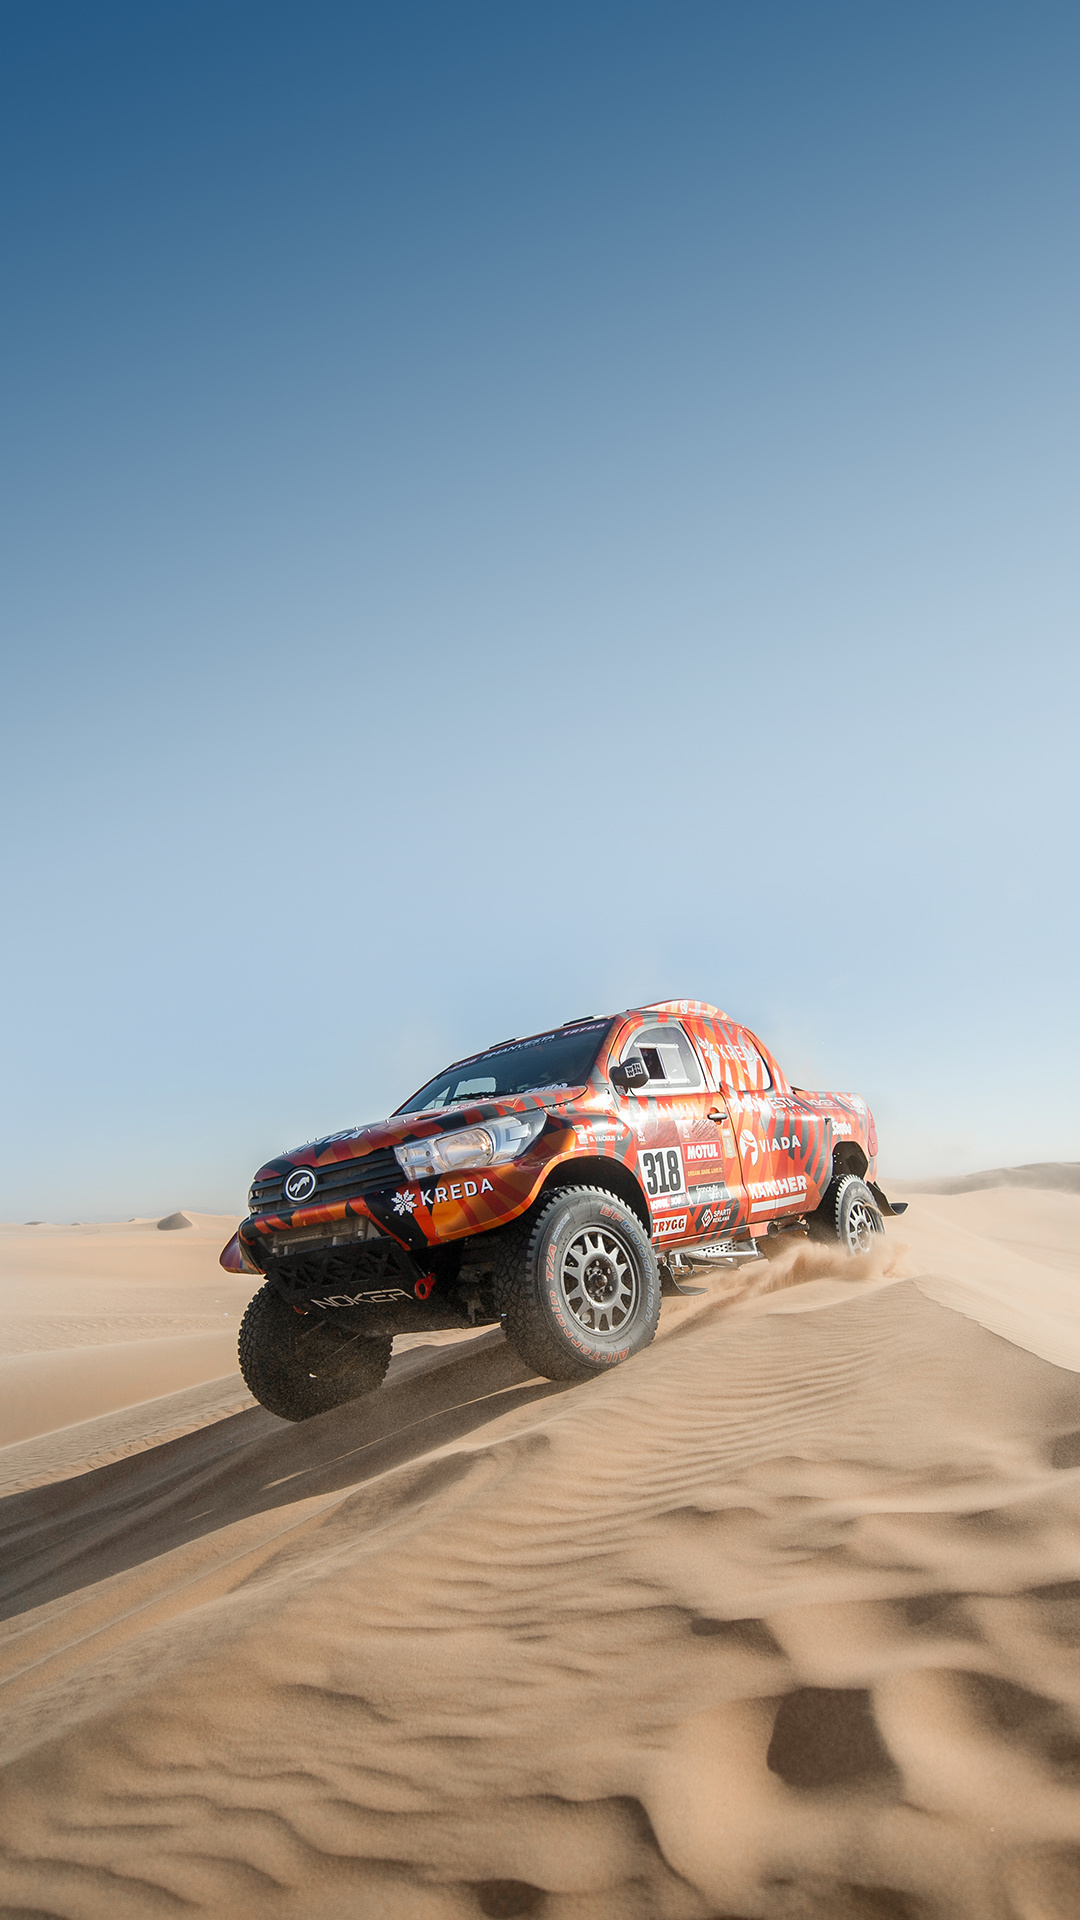 Dakar Rally: The Lithuanian off-road hero, Antanas Juknevicius, The Dakar driver for the seventh time. 1080x1920 Full HD Wallpaper.